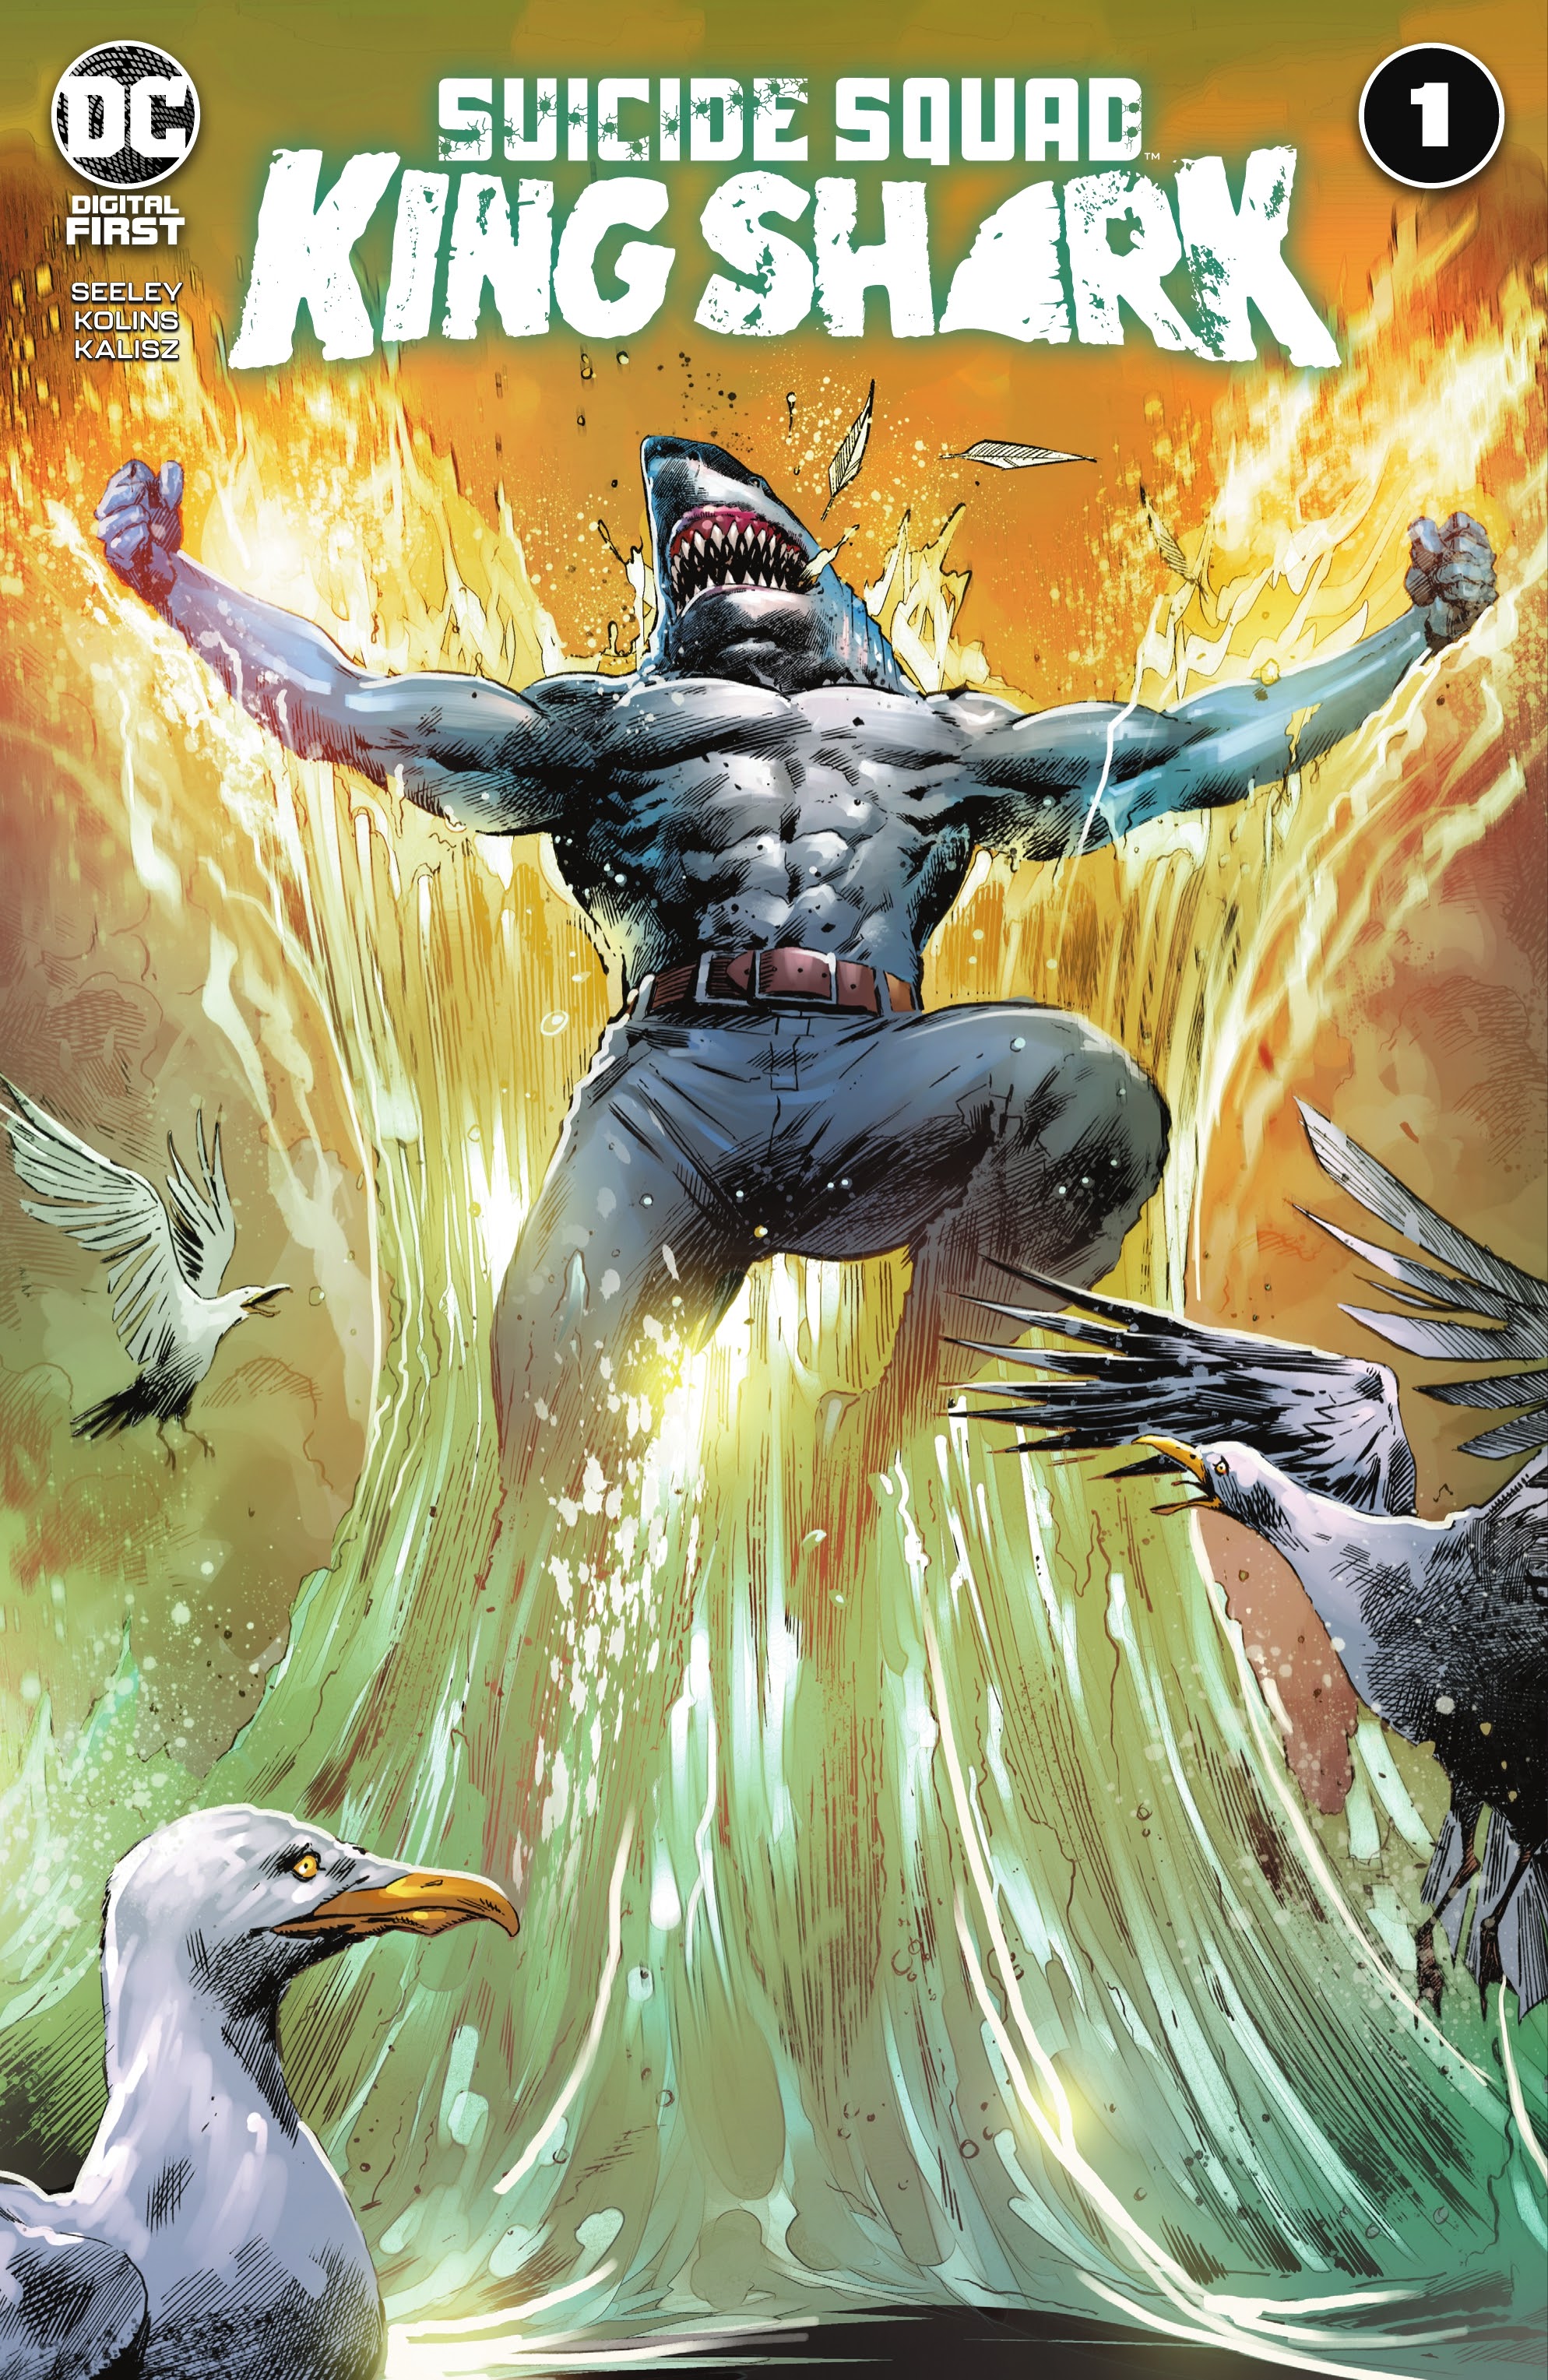 Read online Suicide Squad: King Shark comic -  Issue #1 - 1